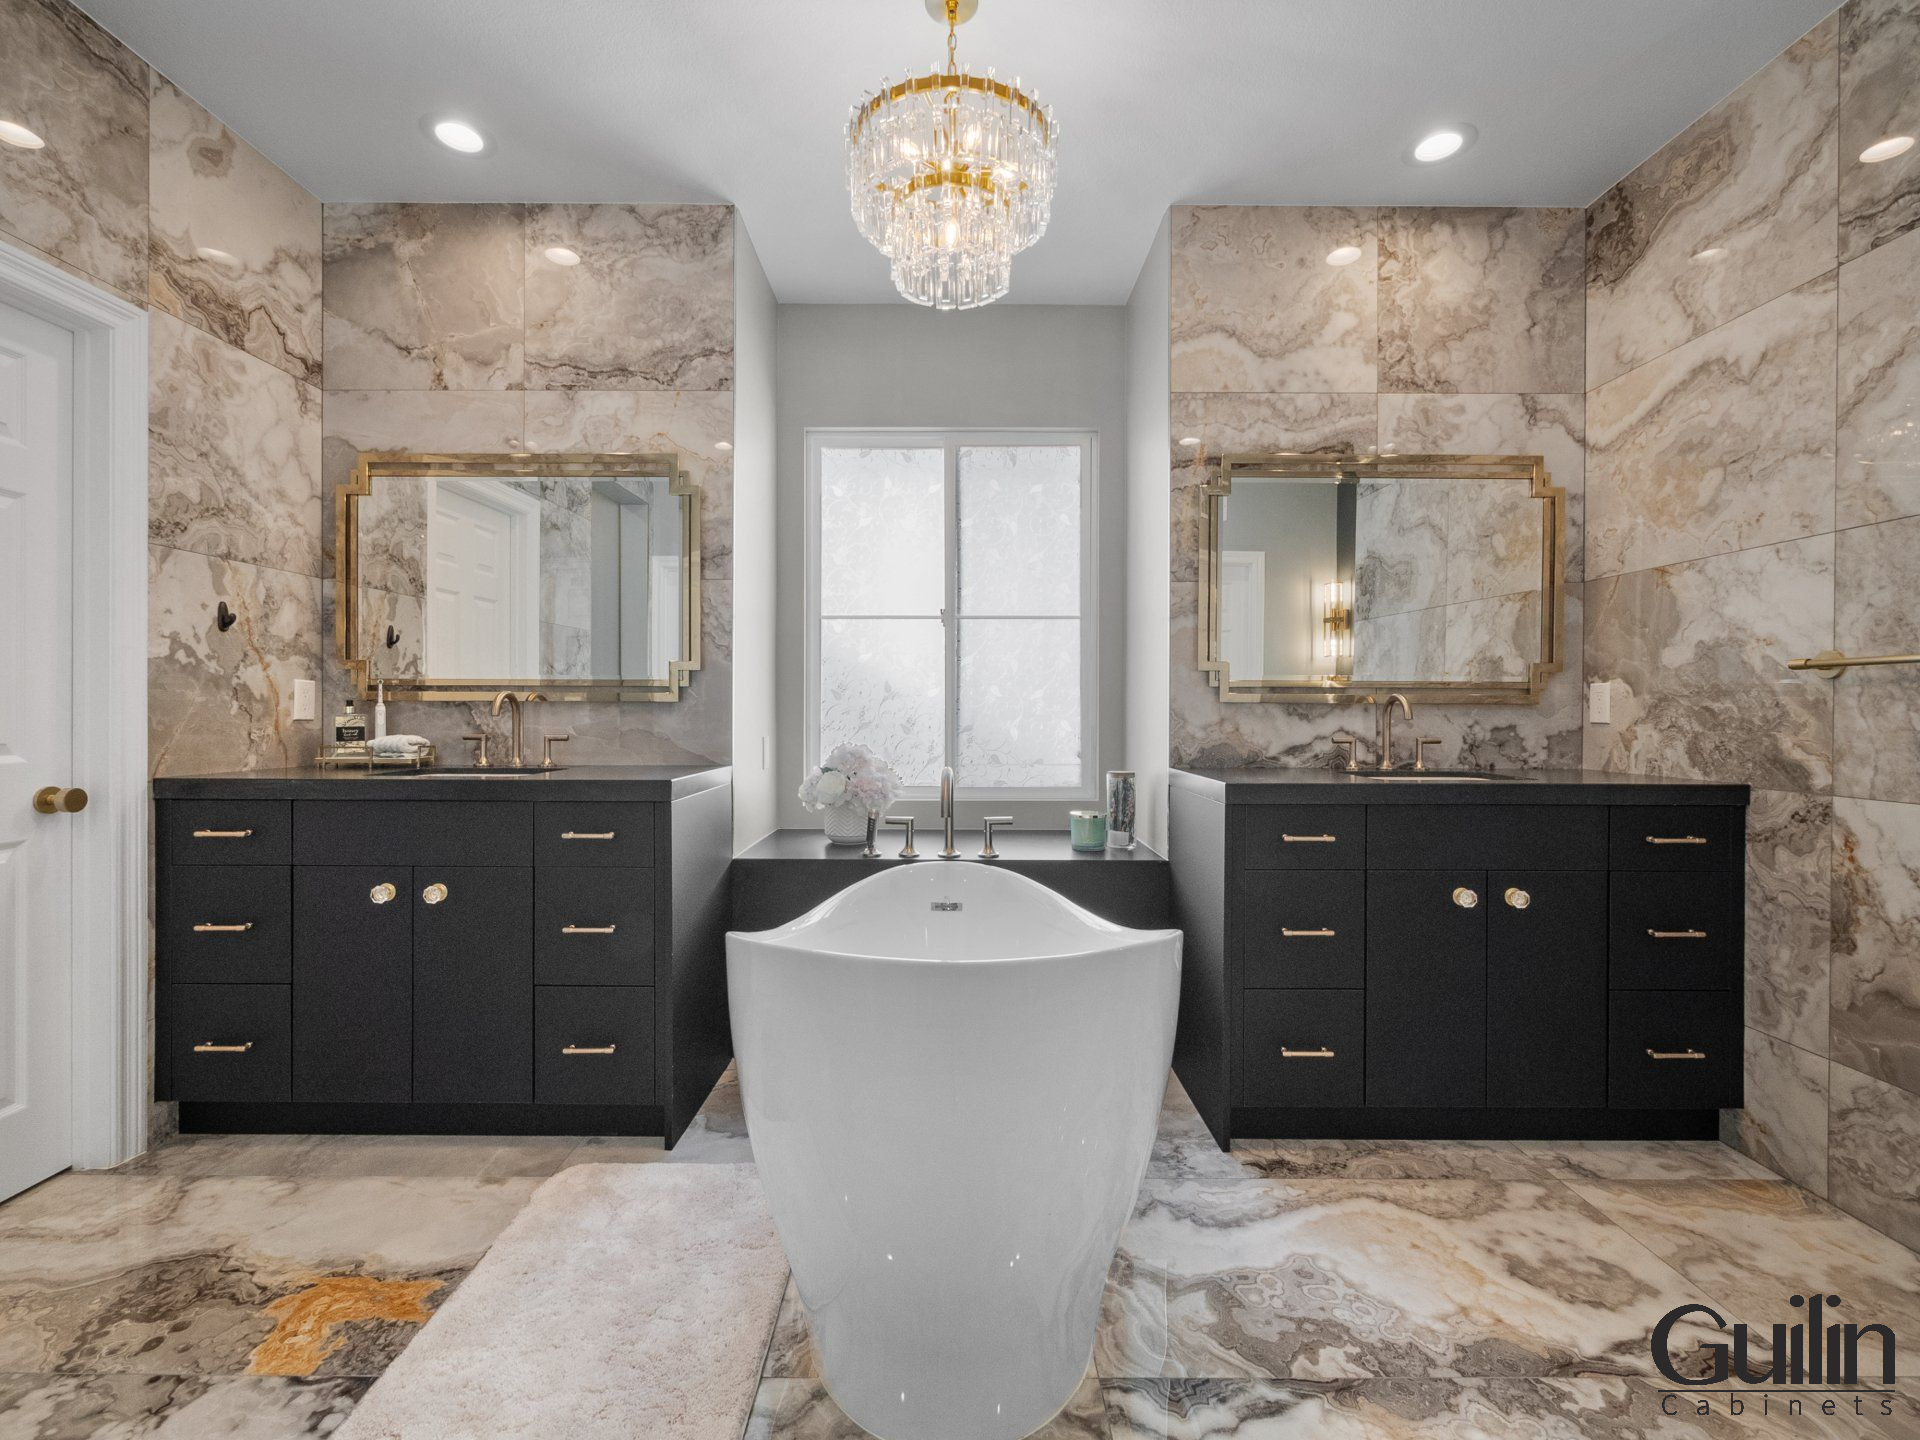 The first step in getting the most out of a bathroom renovation is taking stock of the space's current arrangement.